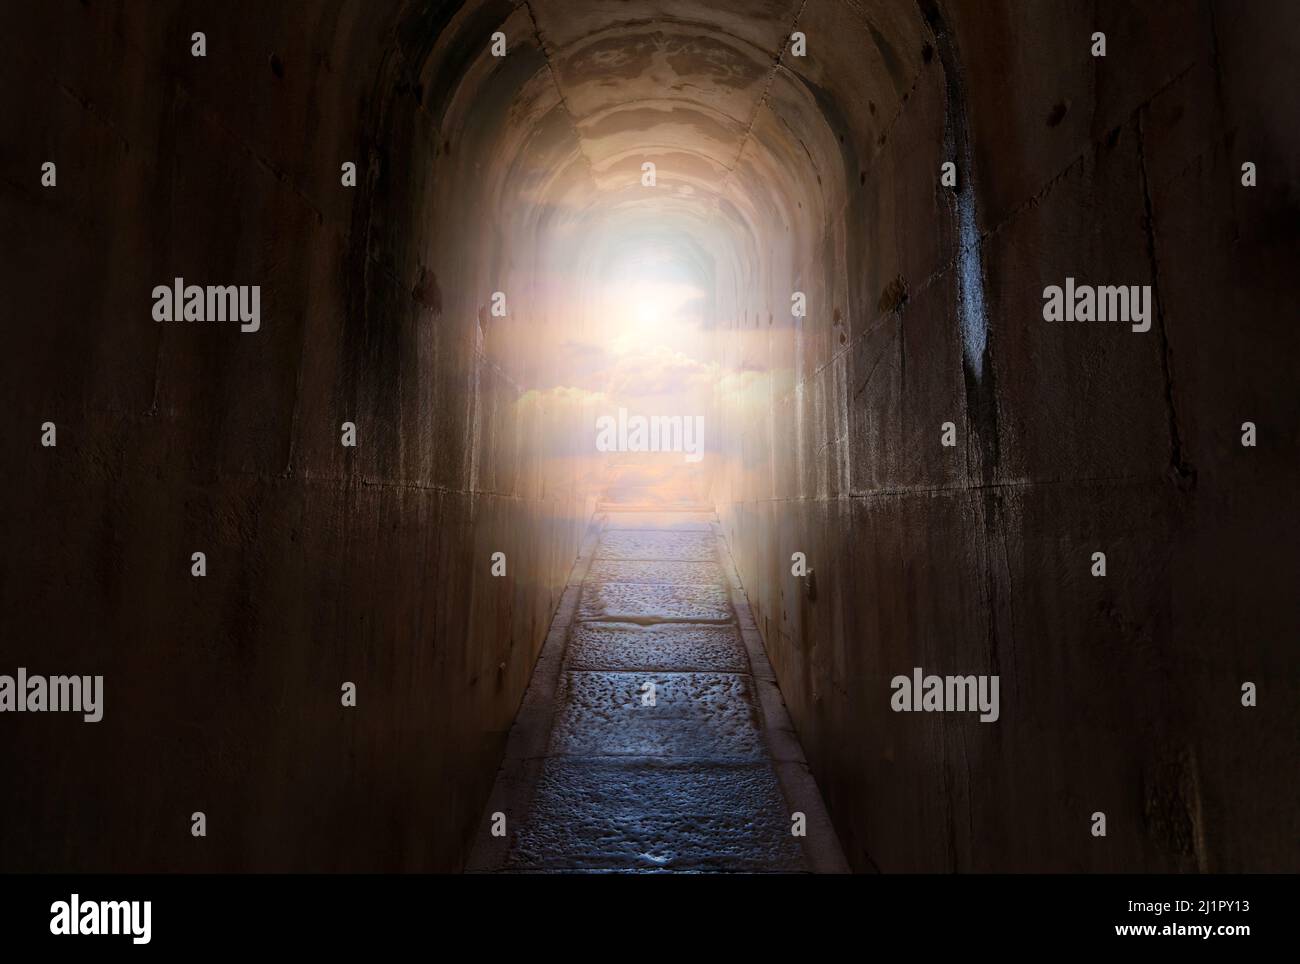 Dark tunnel with narrow path and end of the path shining sky and clouds. Heaven or paradise religion concept. Stock Photo